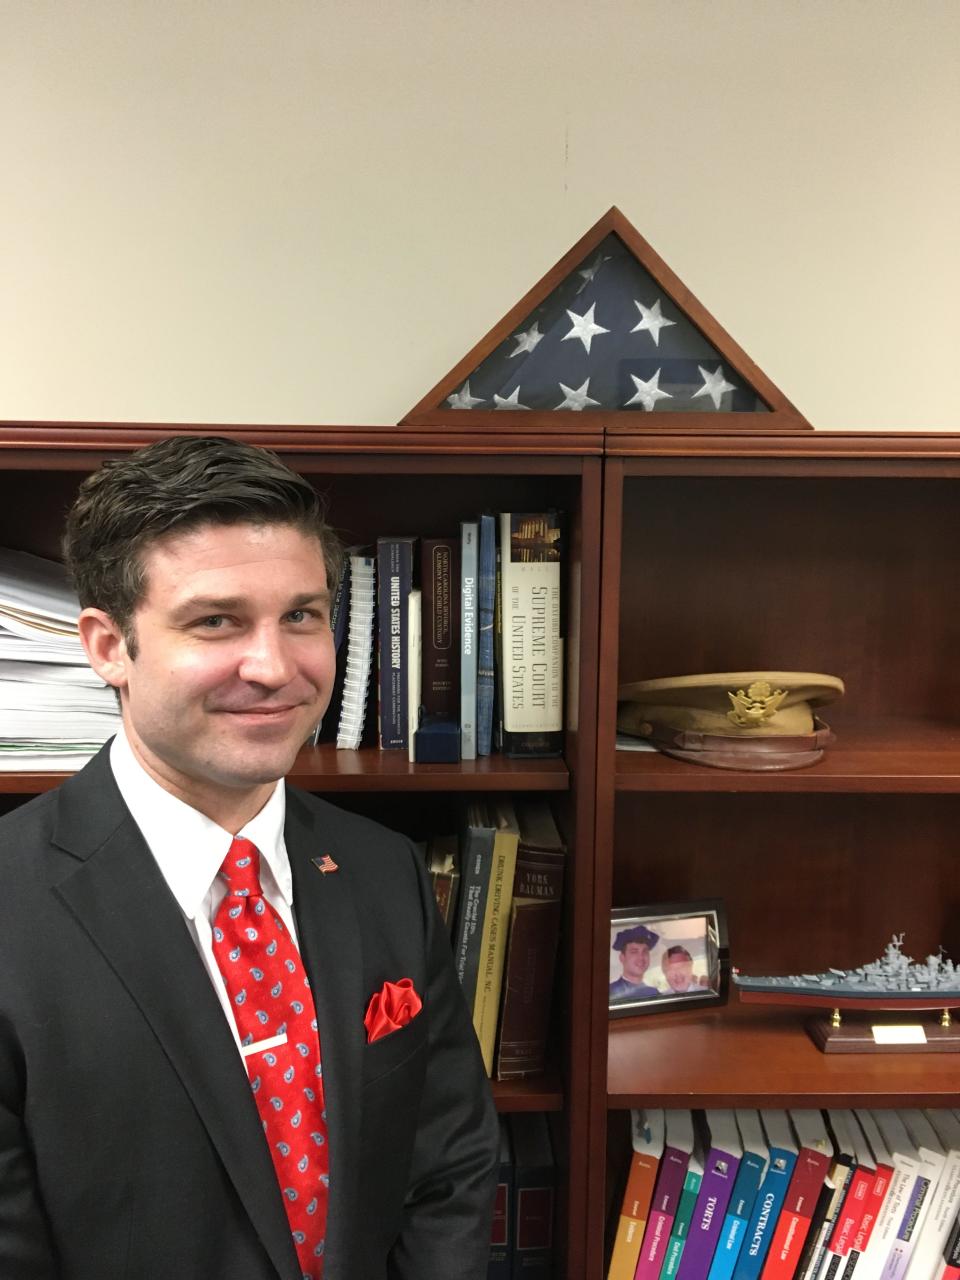 Superior Court Judge Jesse Caldwell IV poses in his office next to a treasured American flag.